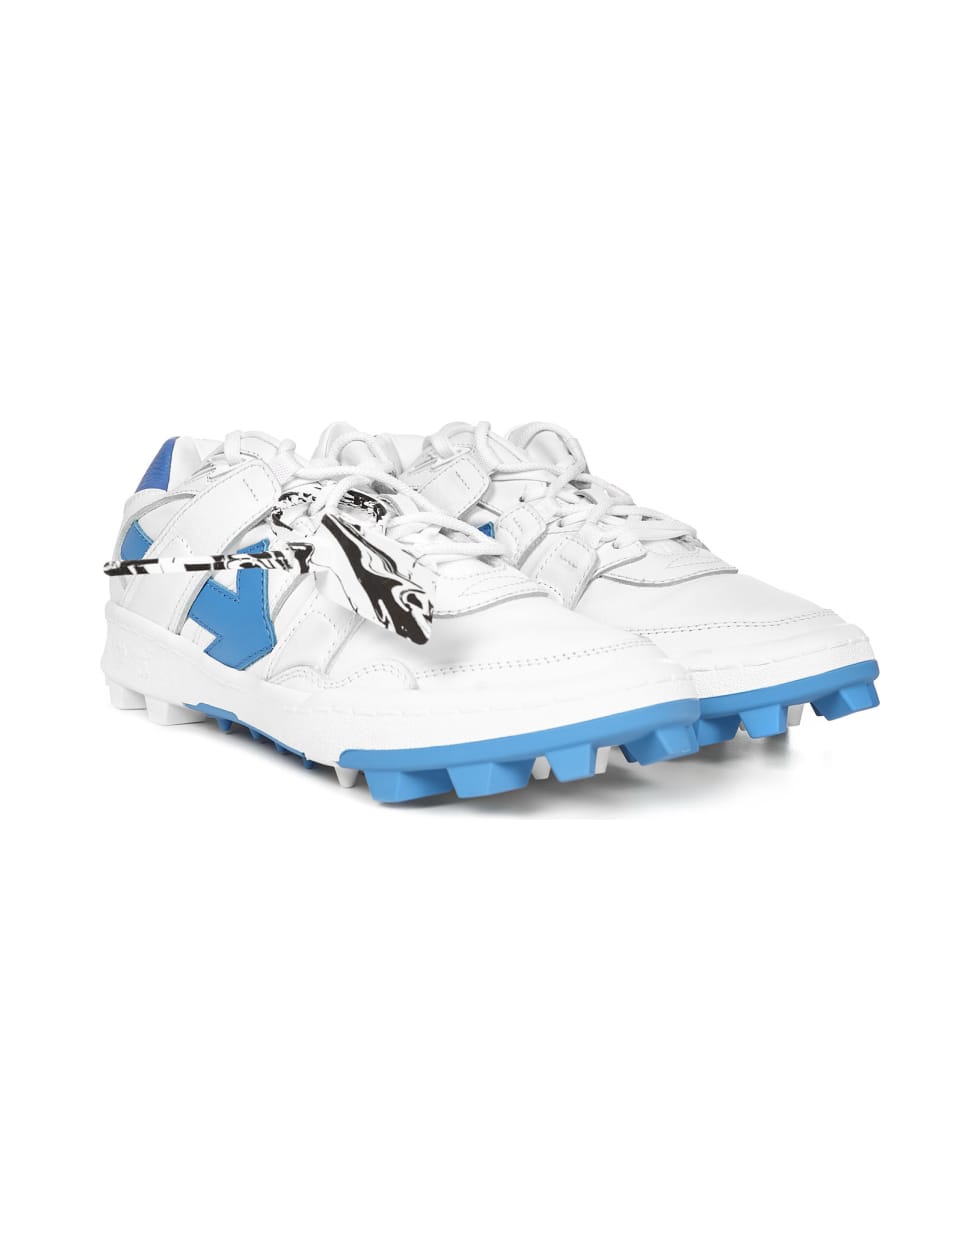 Off-White Mountain Cleats Sneakers - White